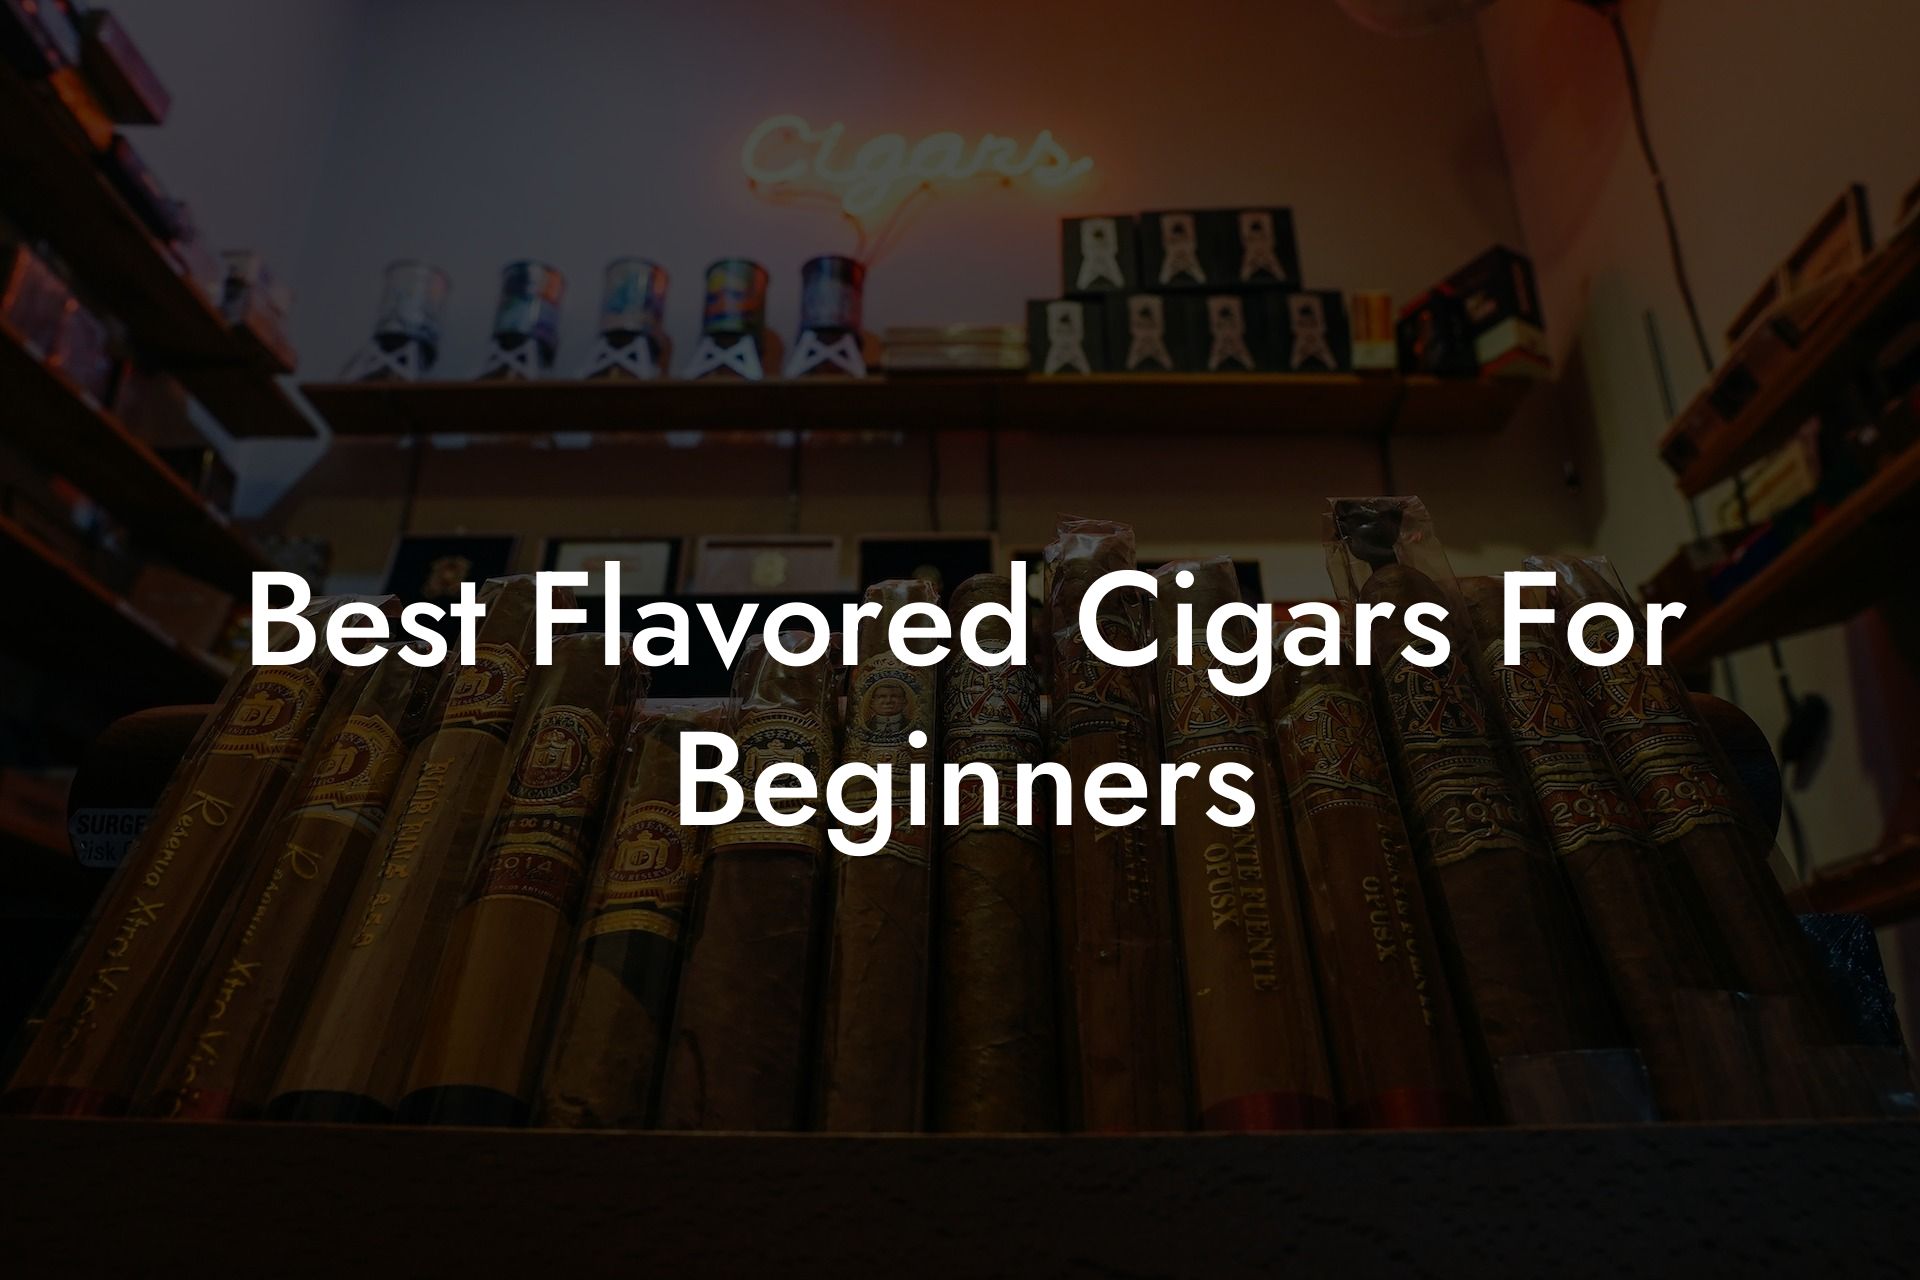 Best Flavored Cigars For Beginners